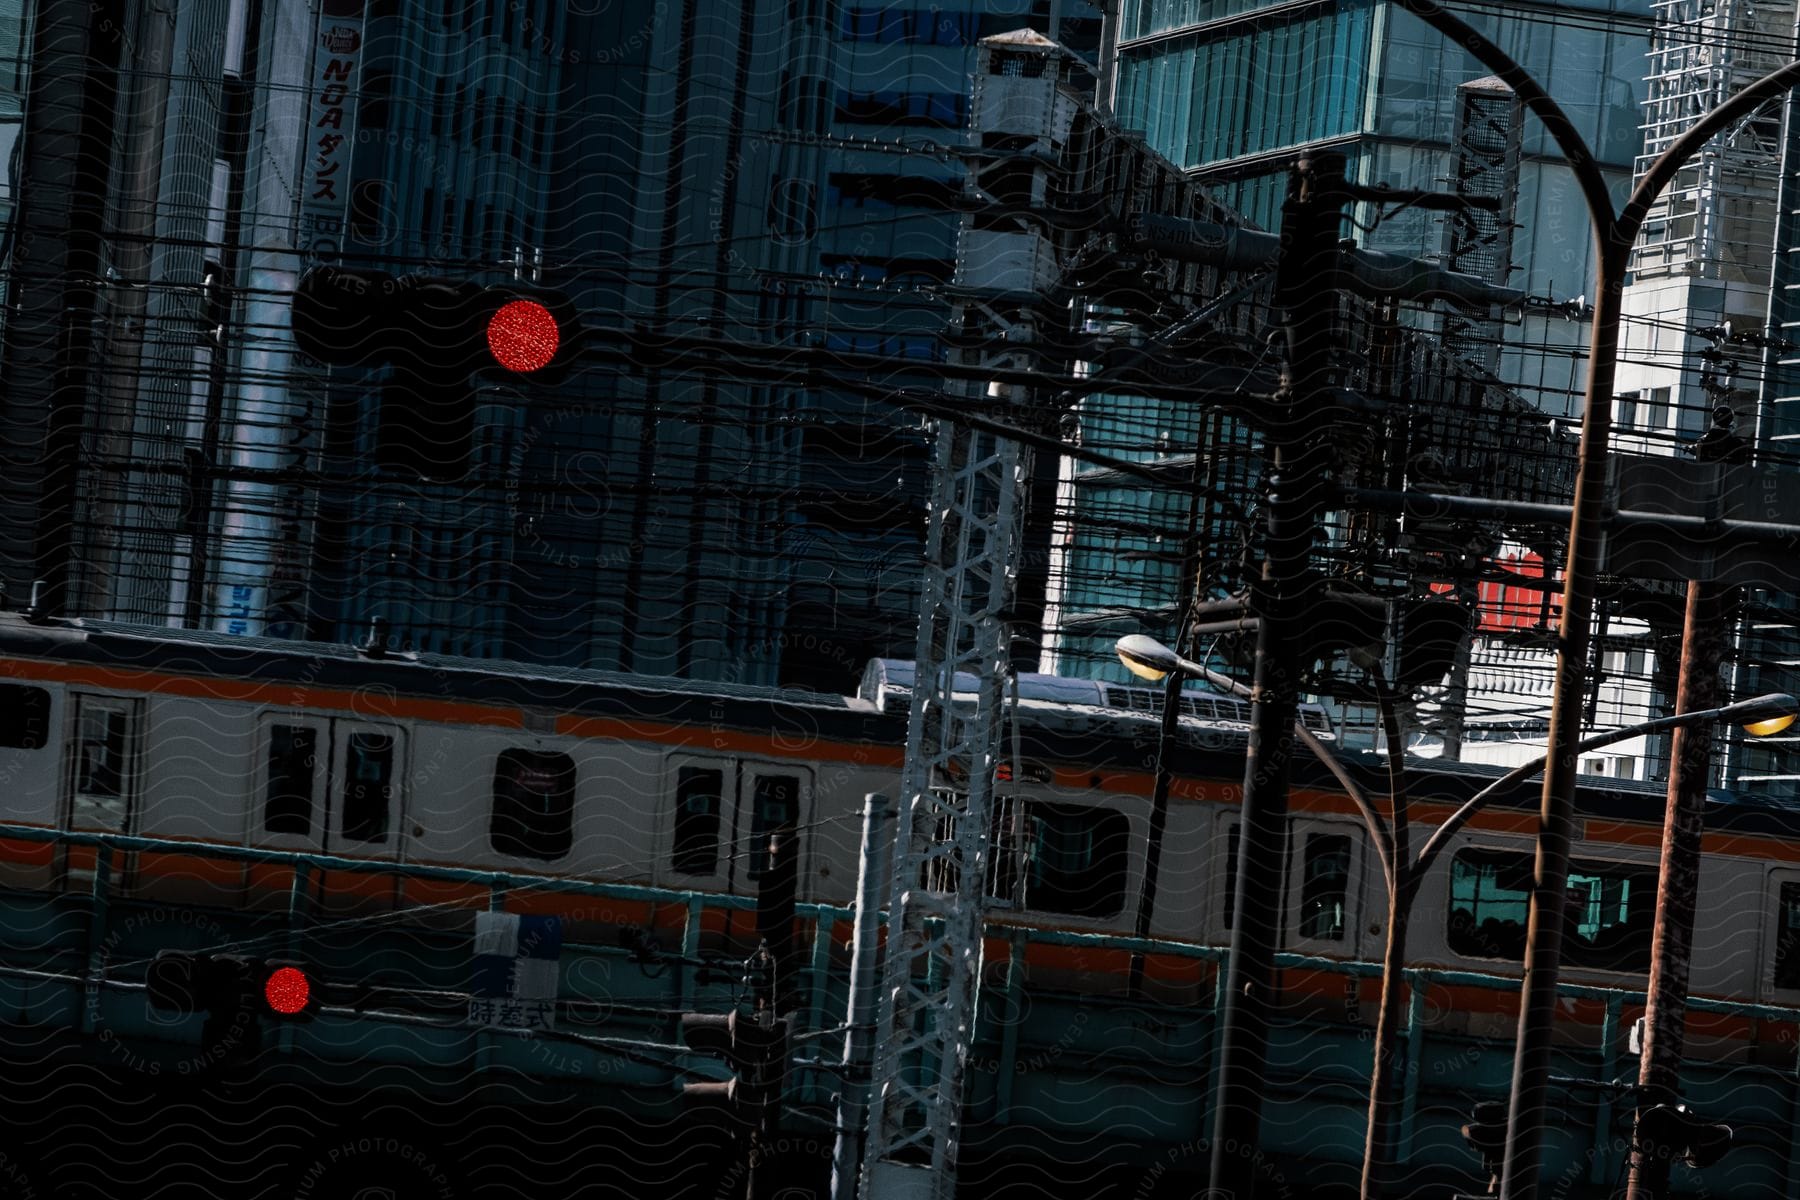 A train travels through a cityscape of tall buildings traffic lights power lines and another train on the tracks